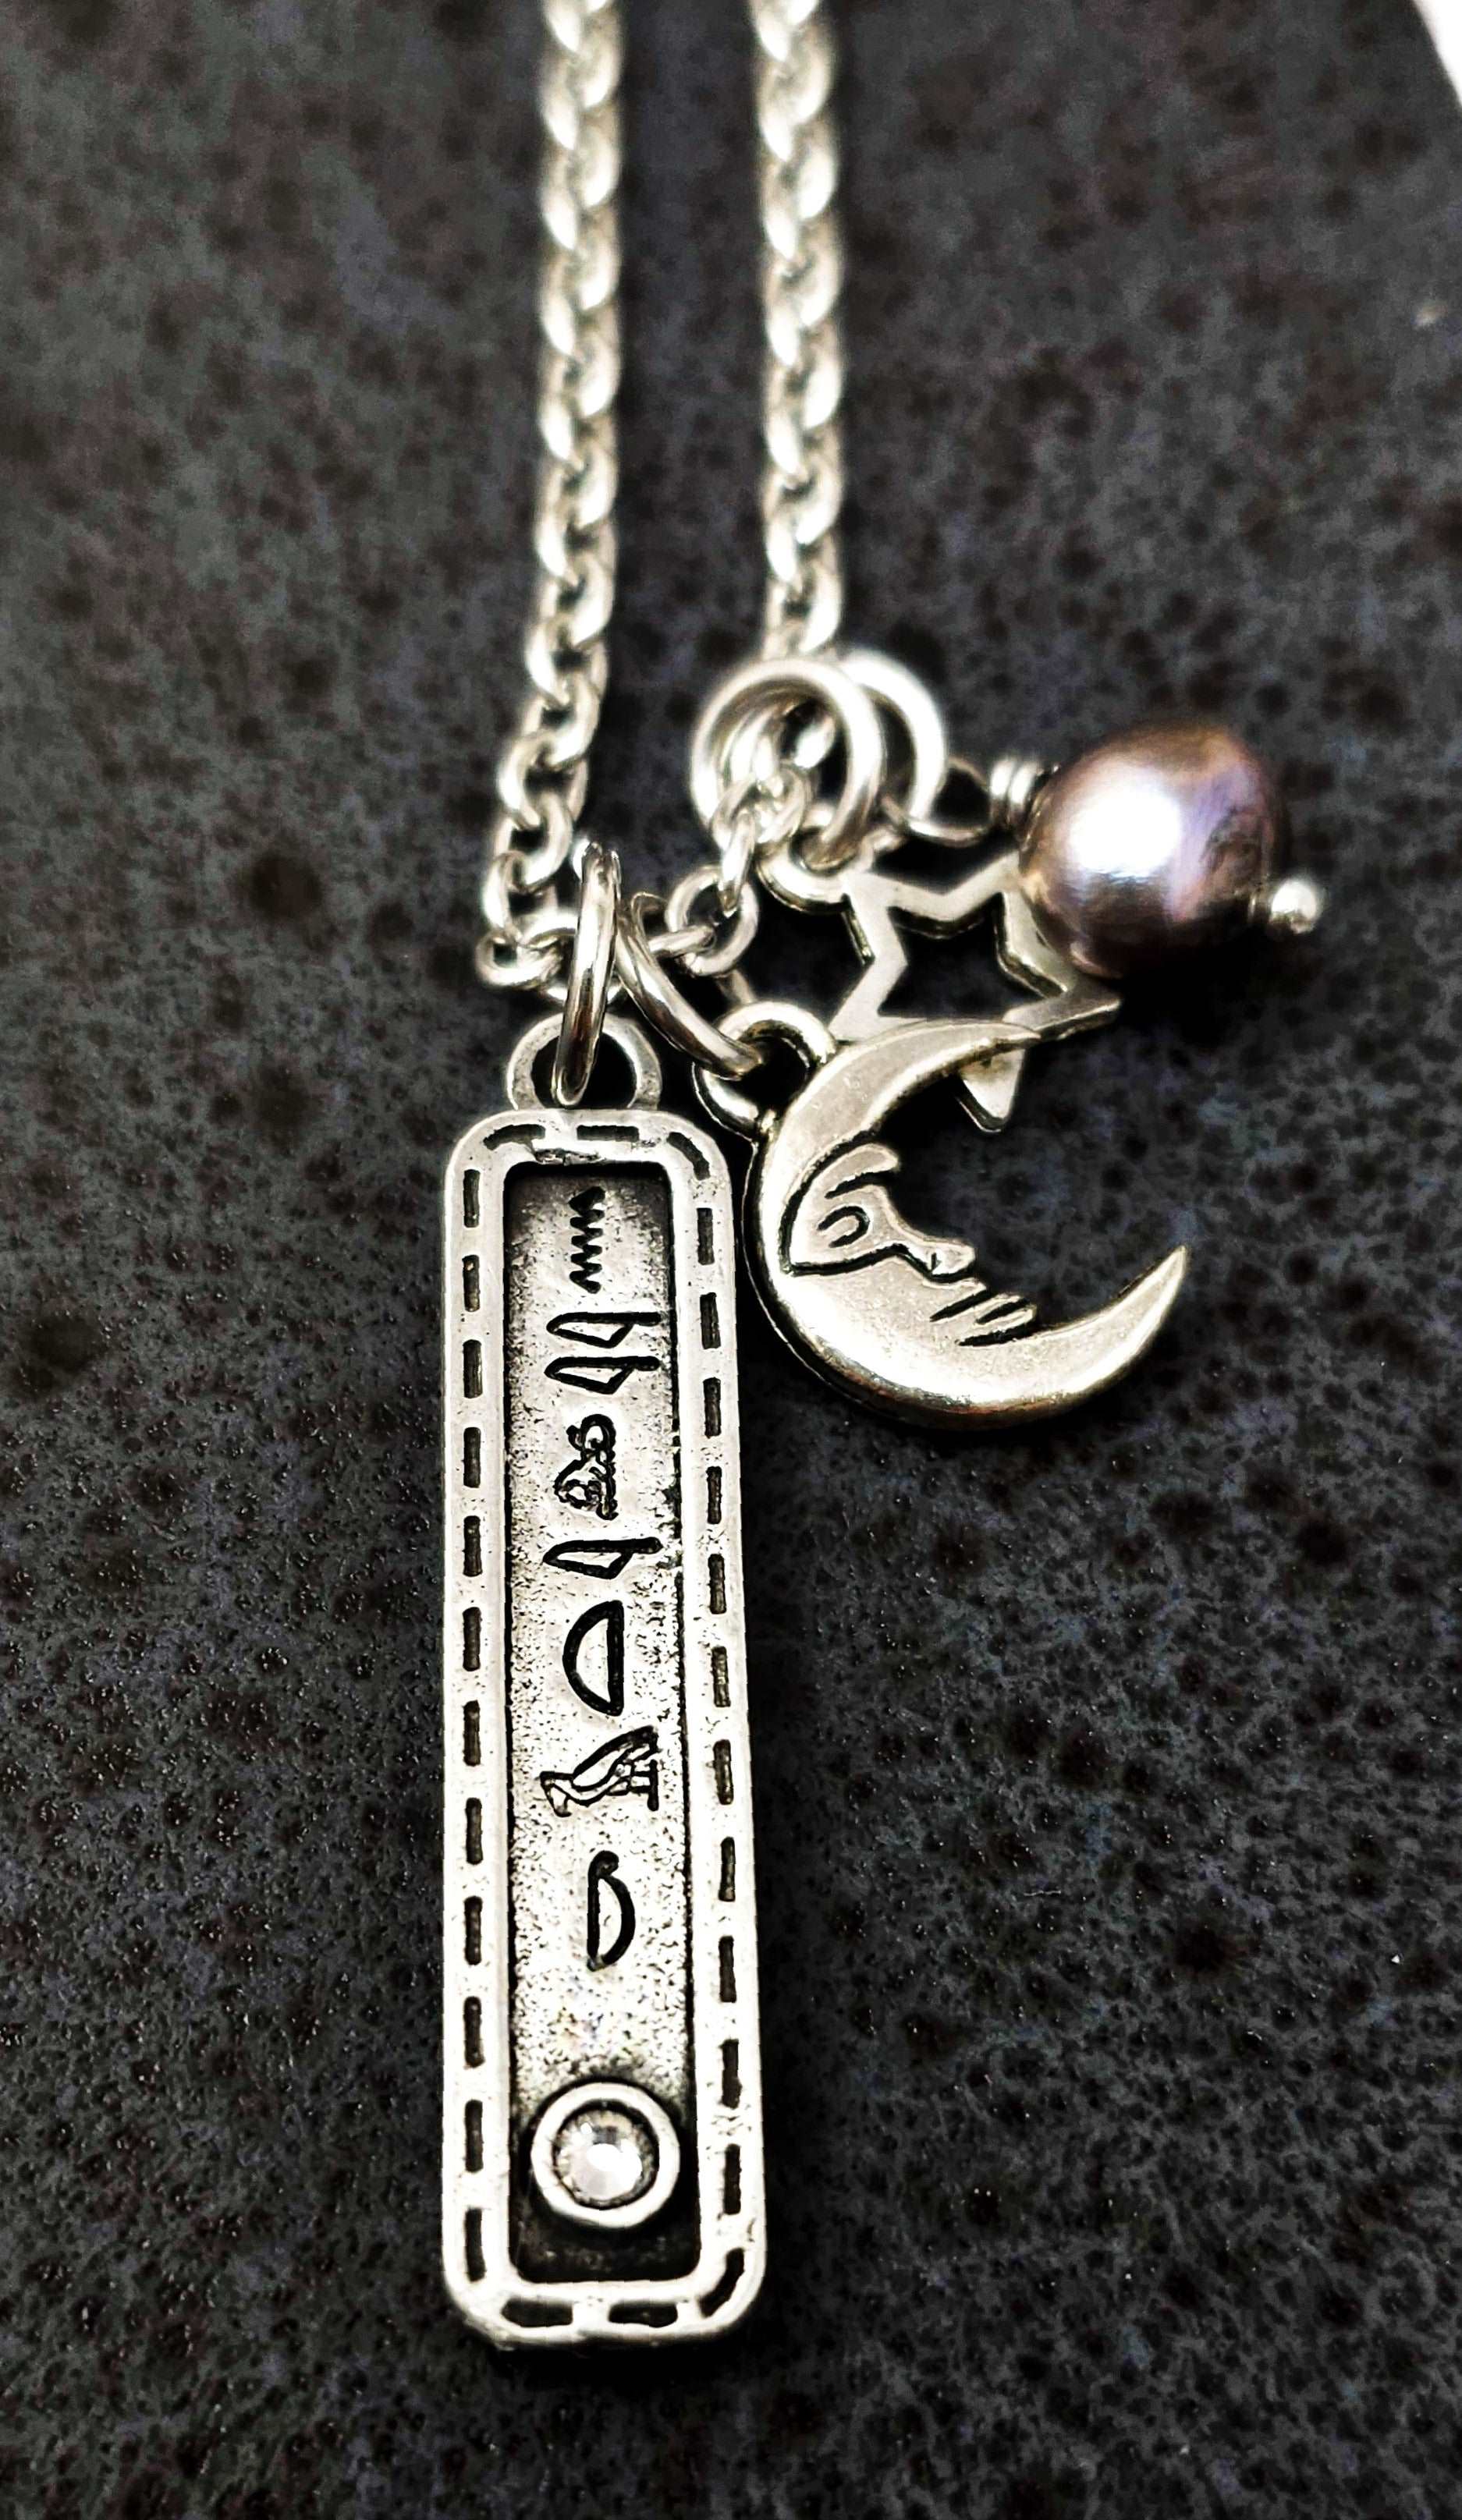 Heiroglyph Necklace, Egyptian Name Necklace, Egyptian Hieroglyphics Jewelry, Custom Hand Stamped Jewelry, Pewter Necklace